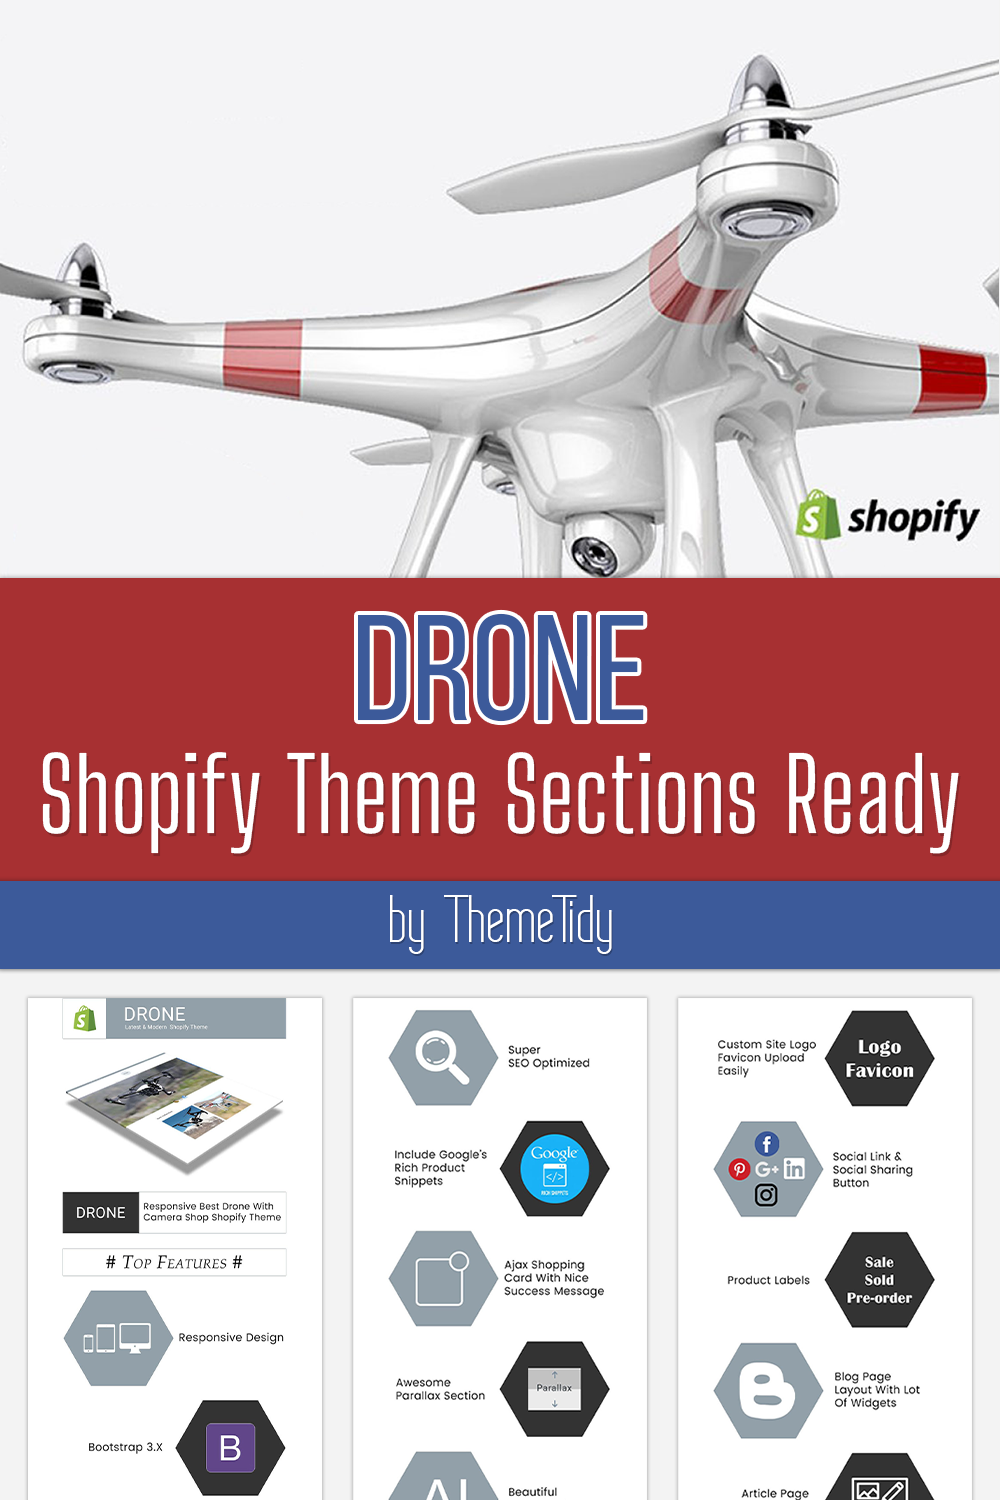 Drone shopify theme sections ready images of pinterest.